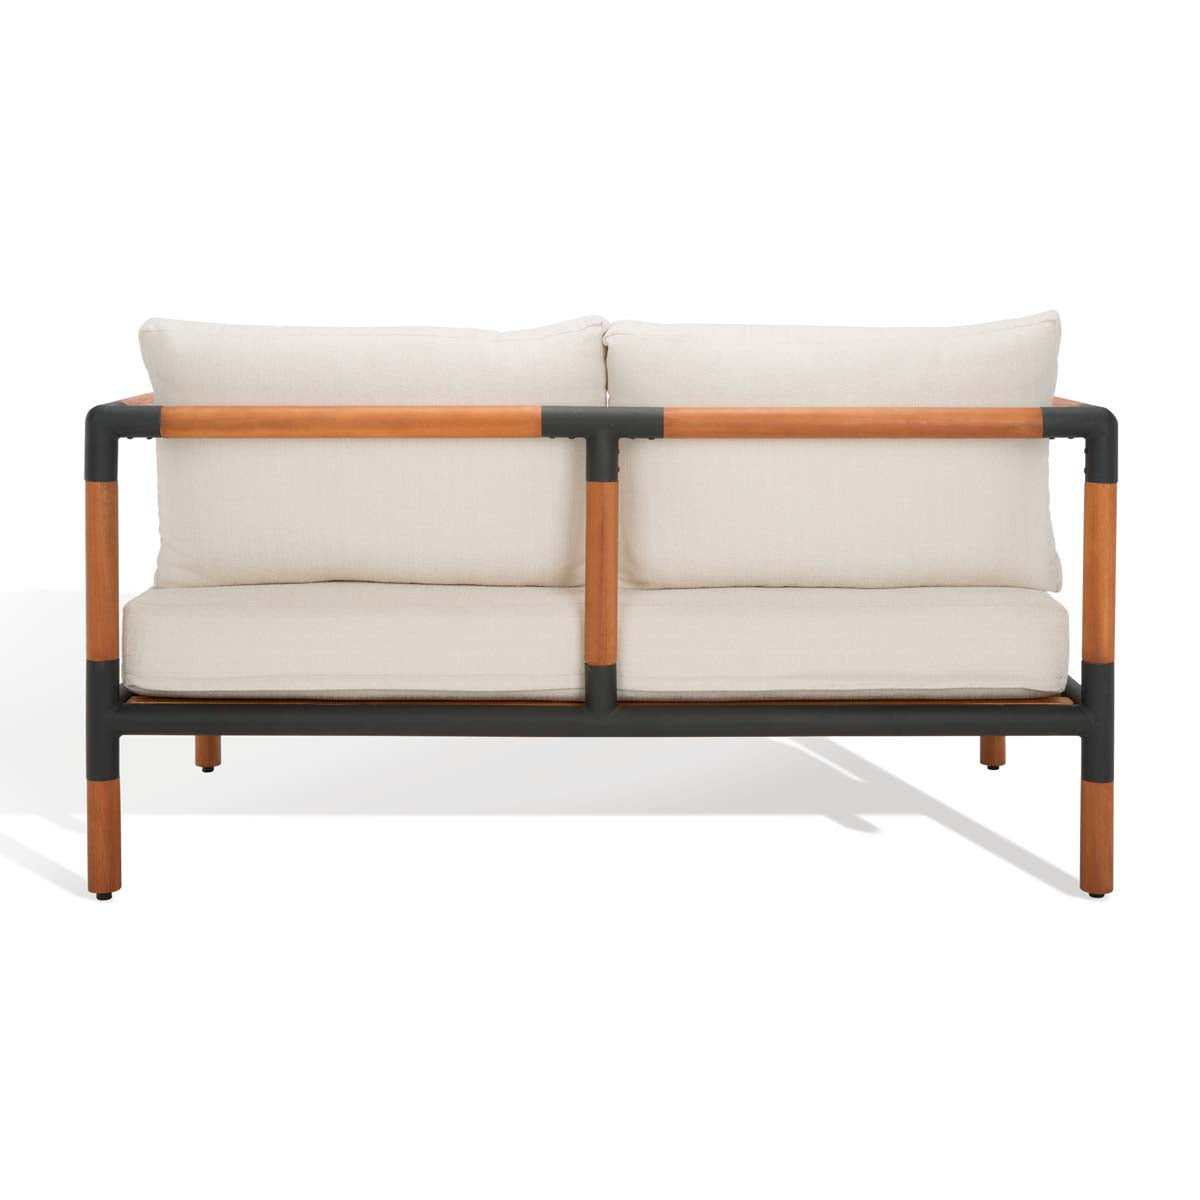 Safavieh Couture Tommy Metal And Wood Patio Sofa